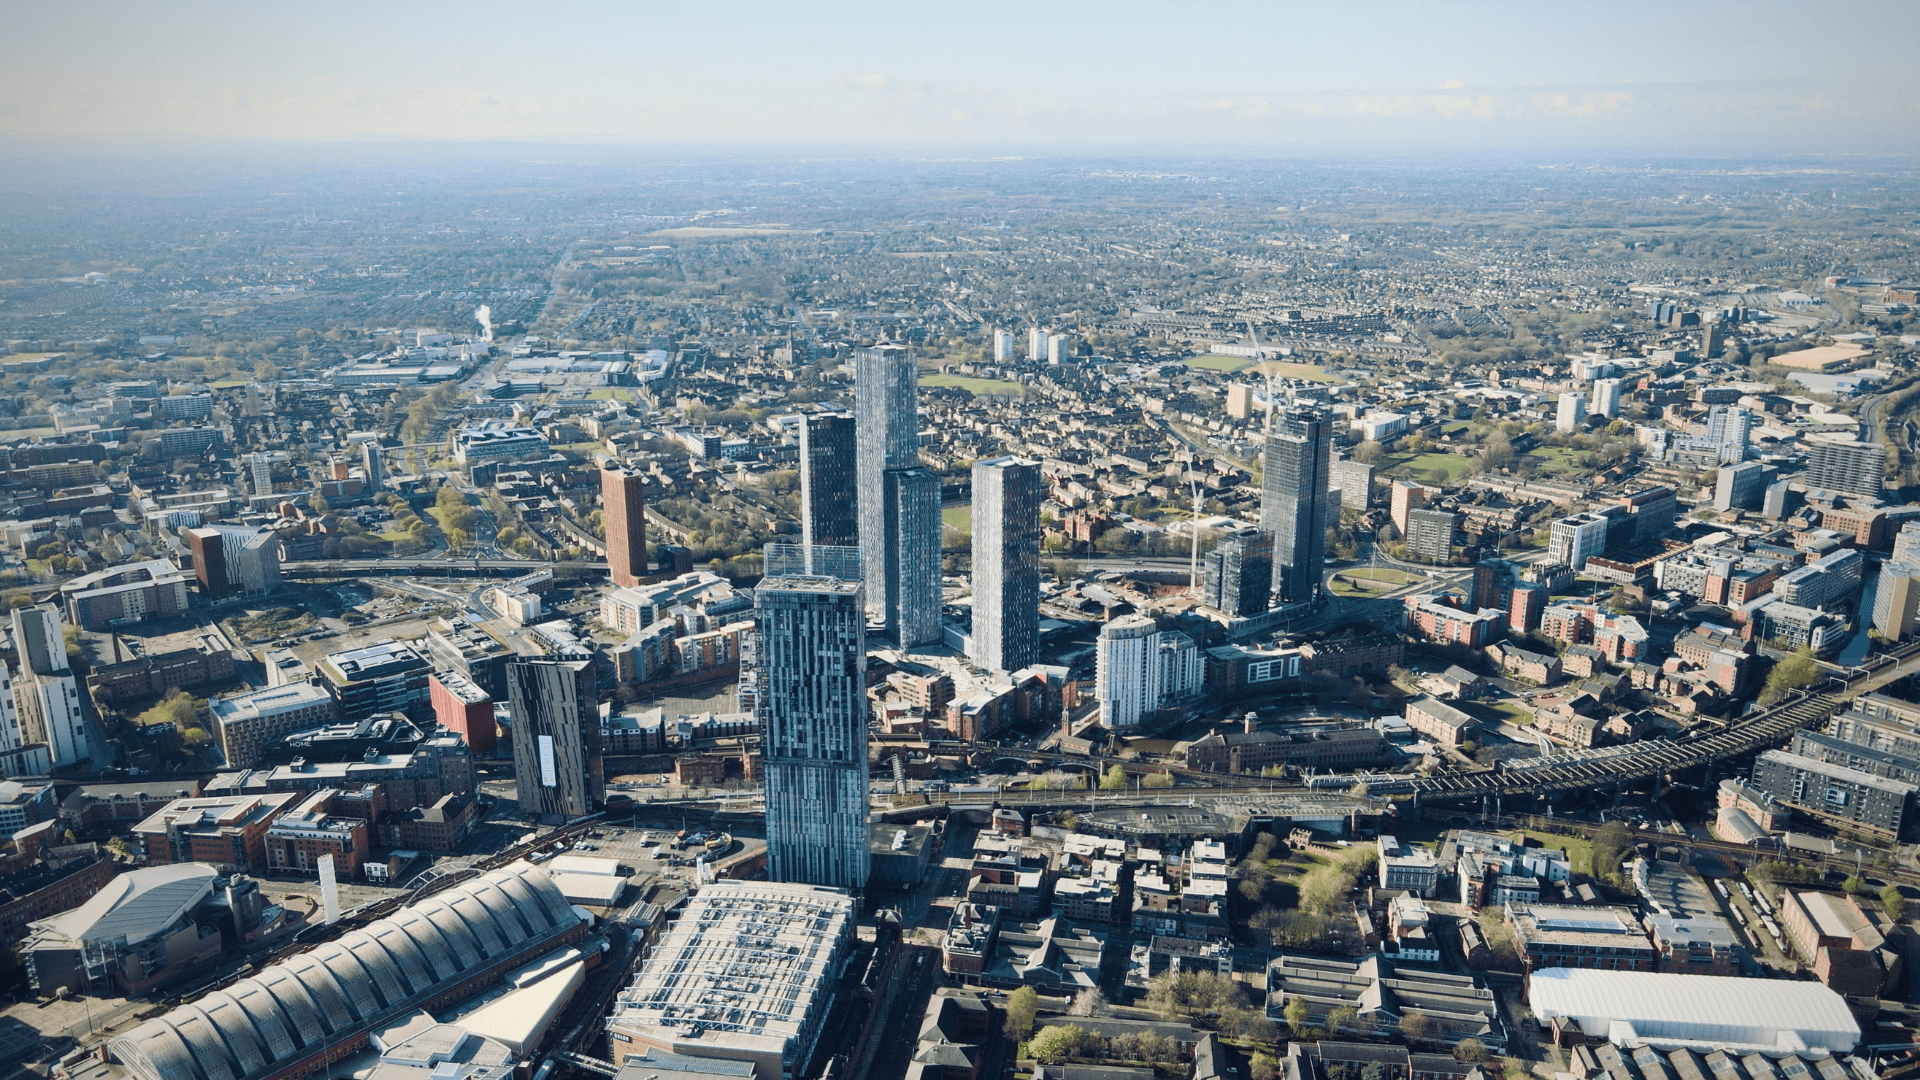 Aerial view of the Manchester City Region